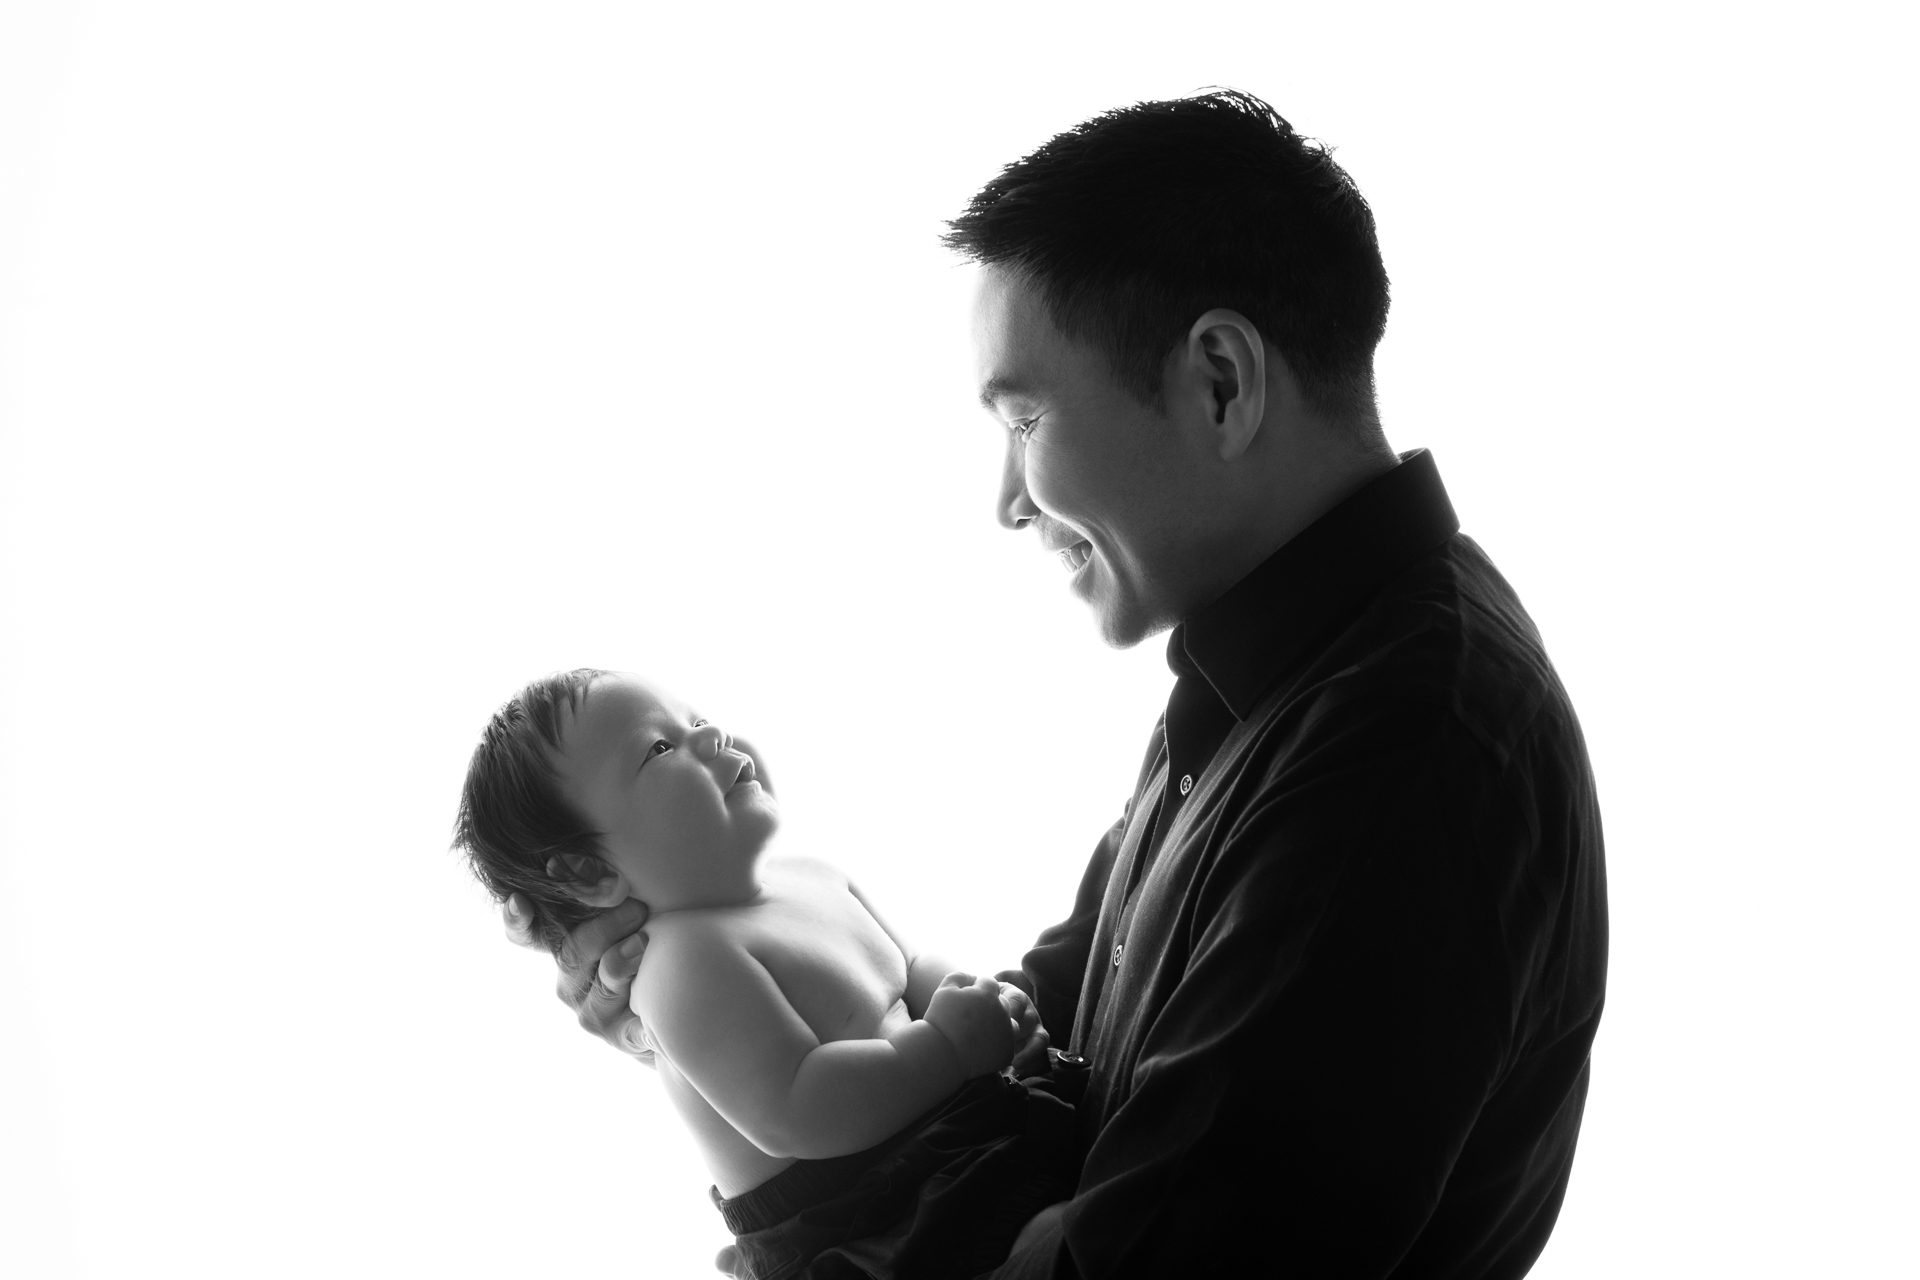 A father poses indoors with his son, white background. Dark outfits, black and white image.